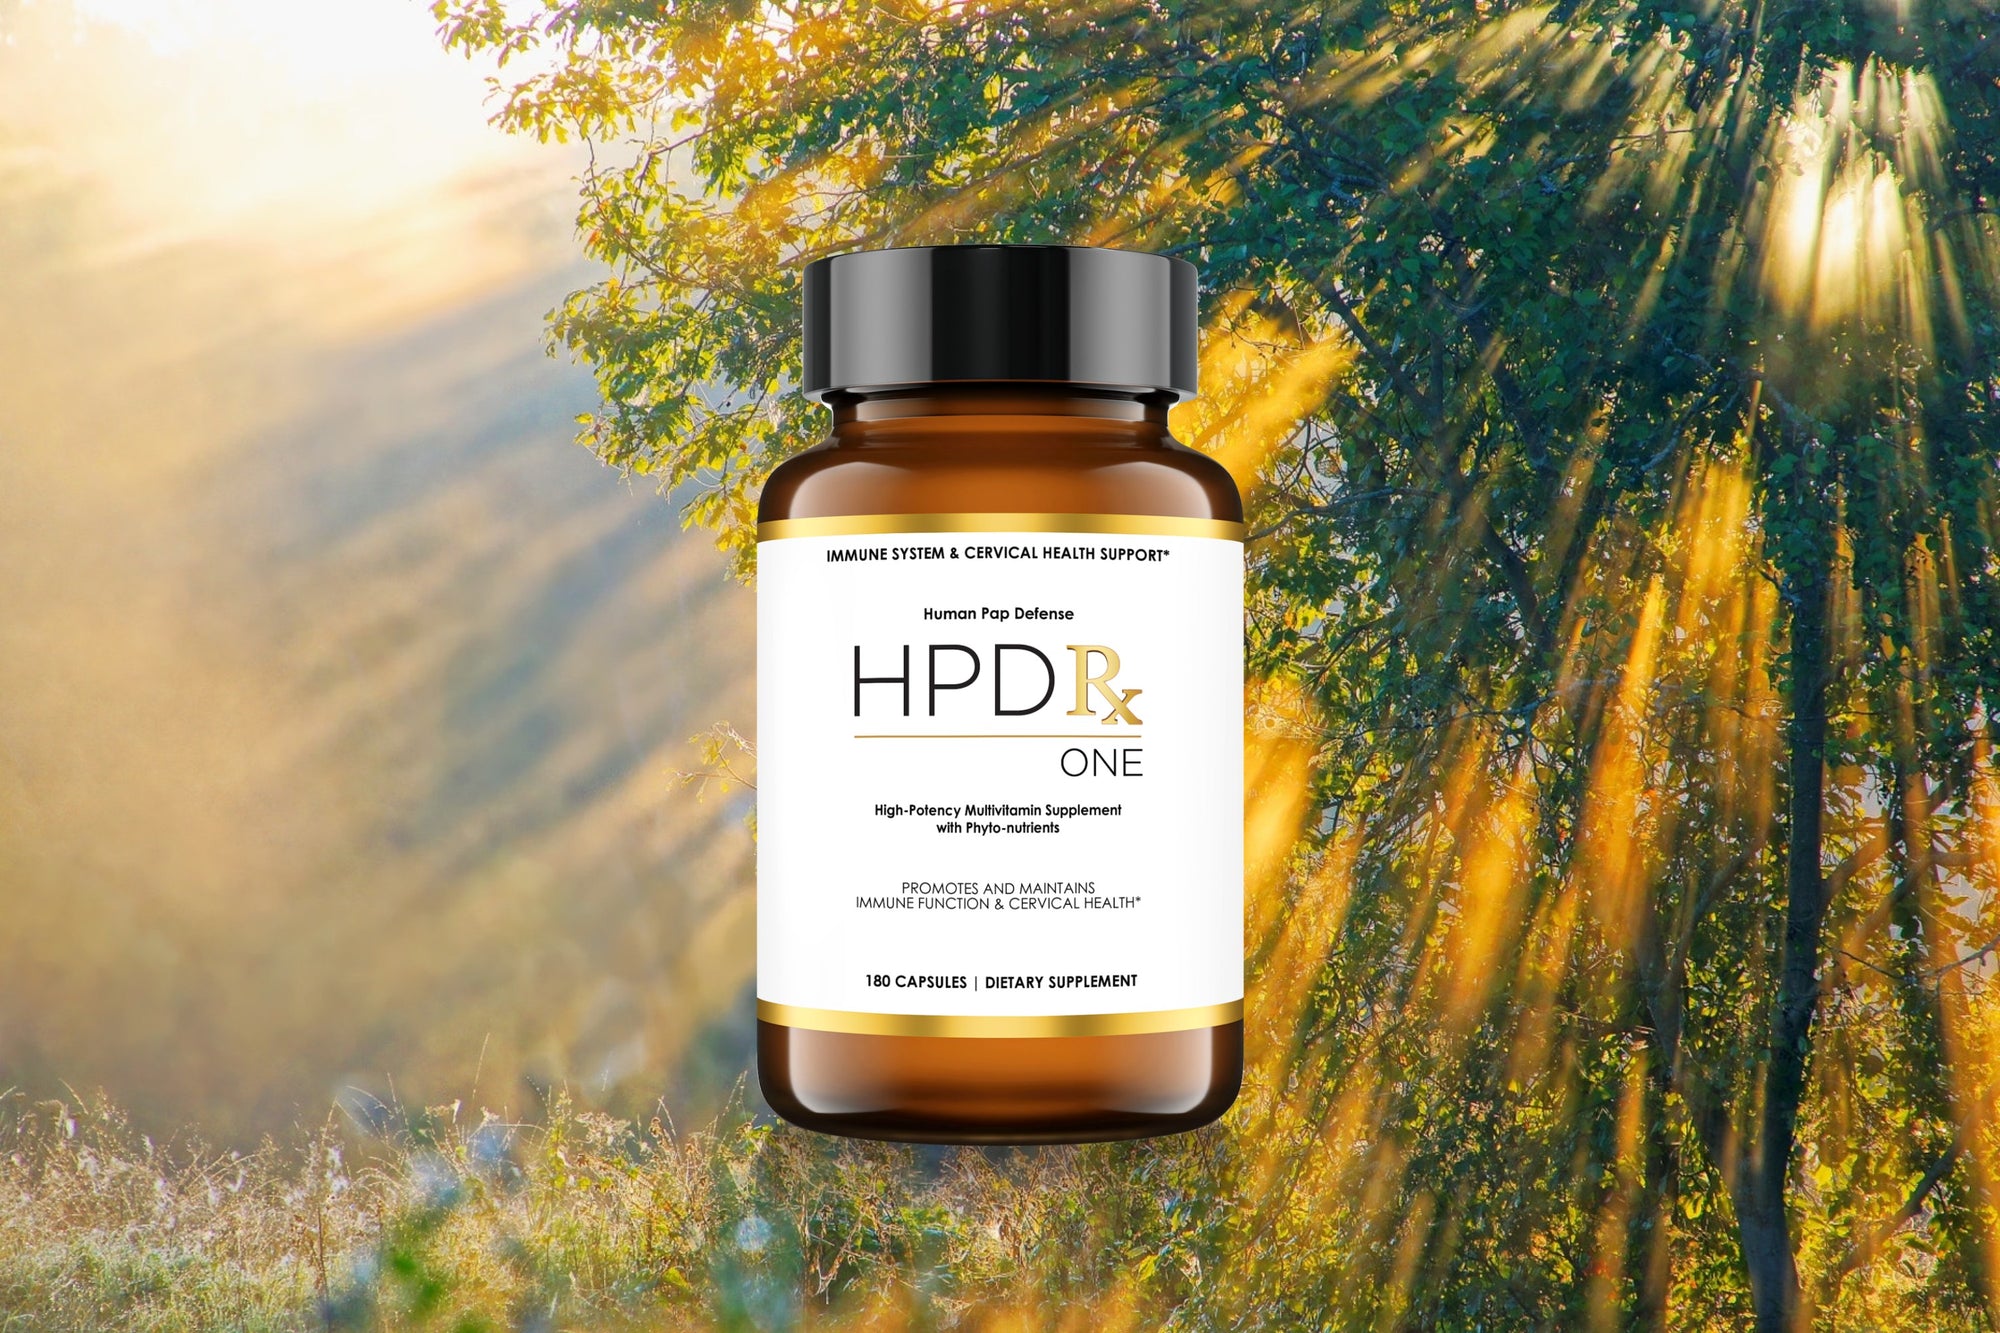 The Benefits of the Ingredients in HPD Rx ONE